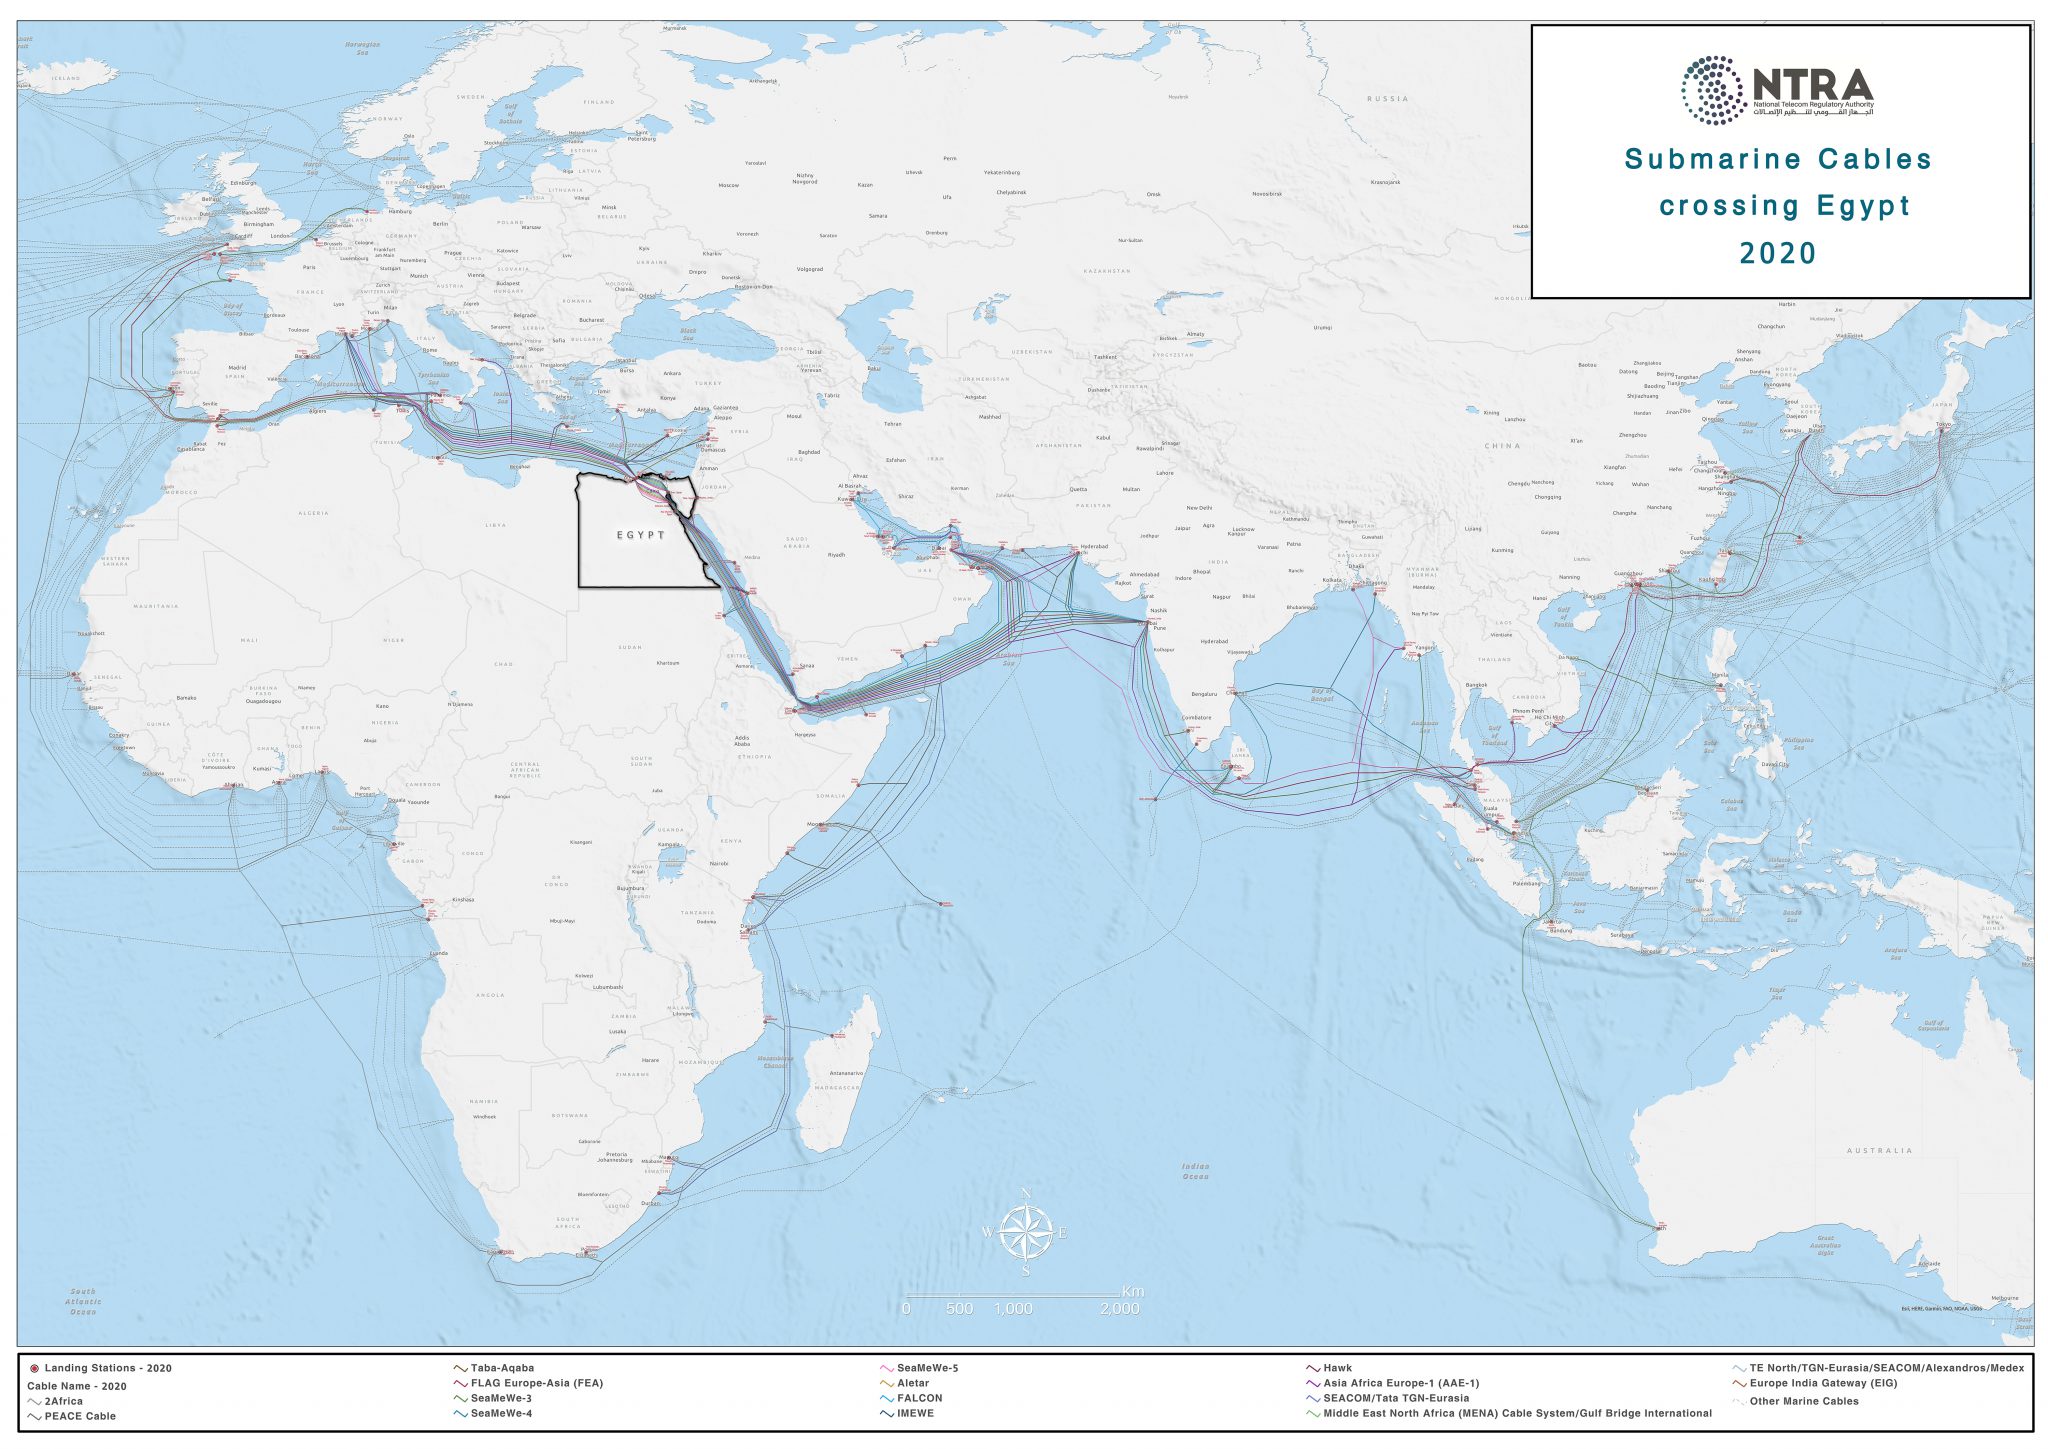 submarine cable map from nyc to london